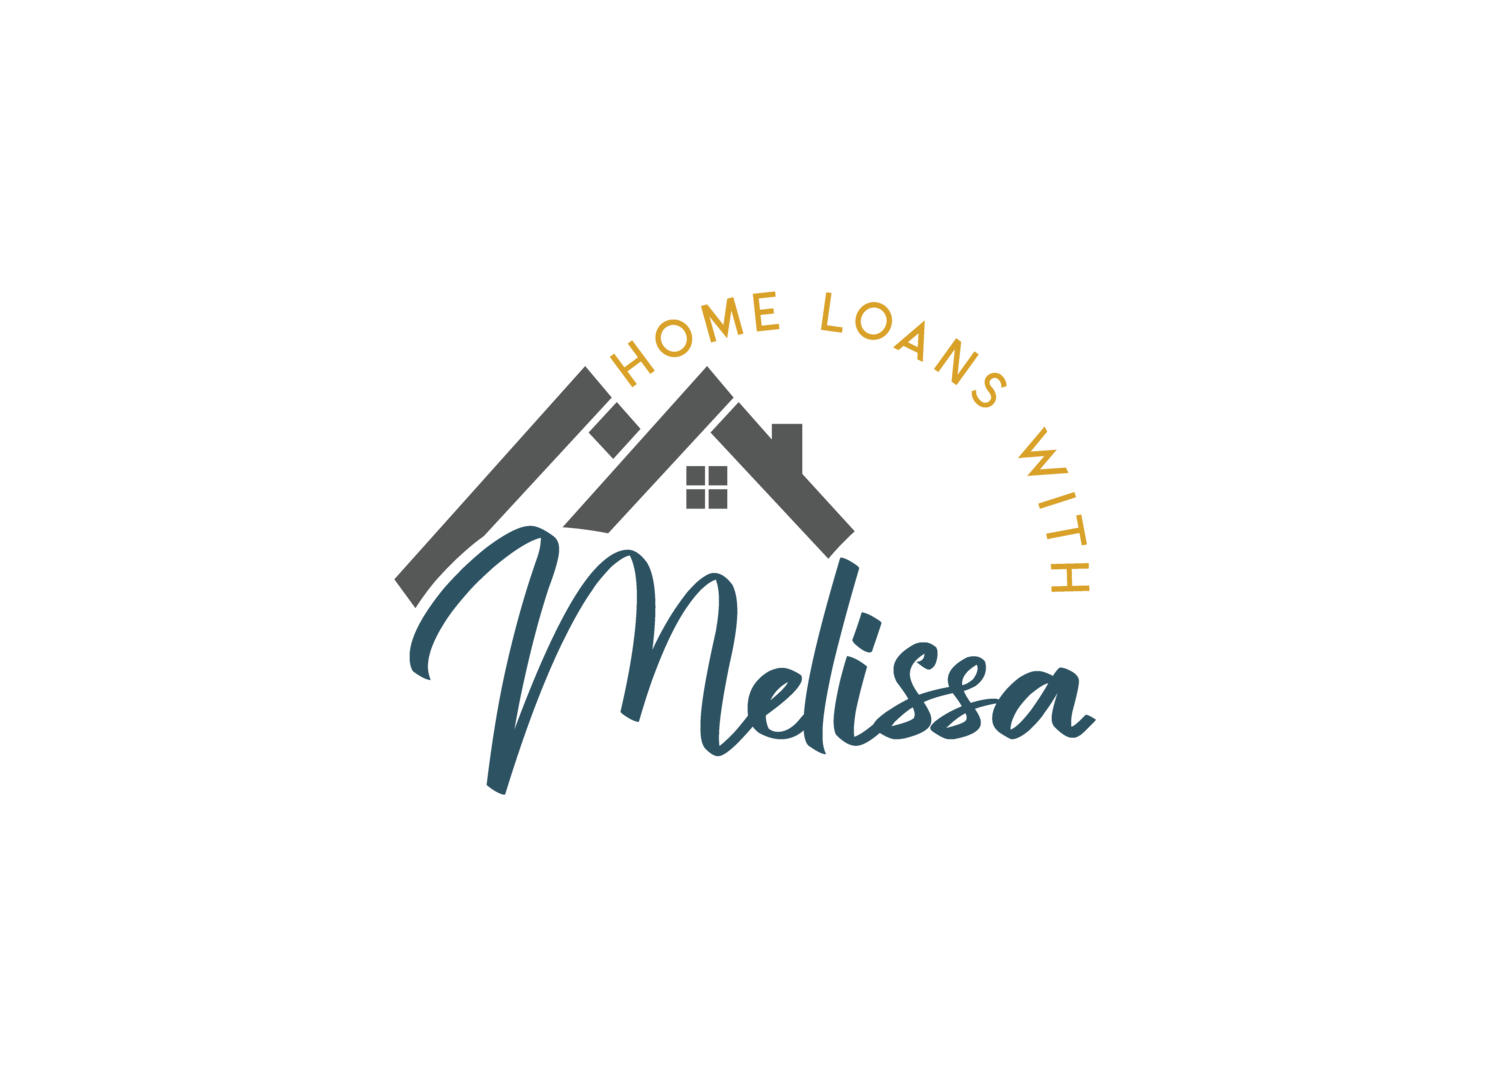 Home Loans with Melissa